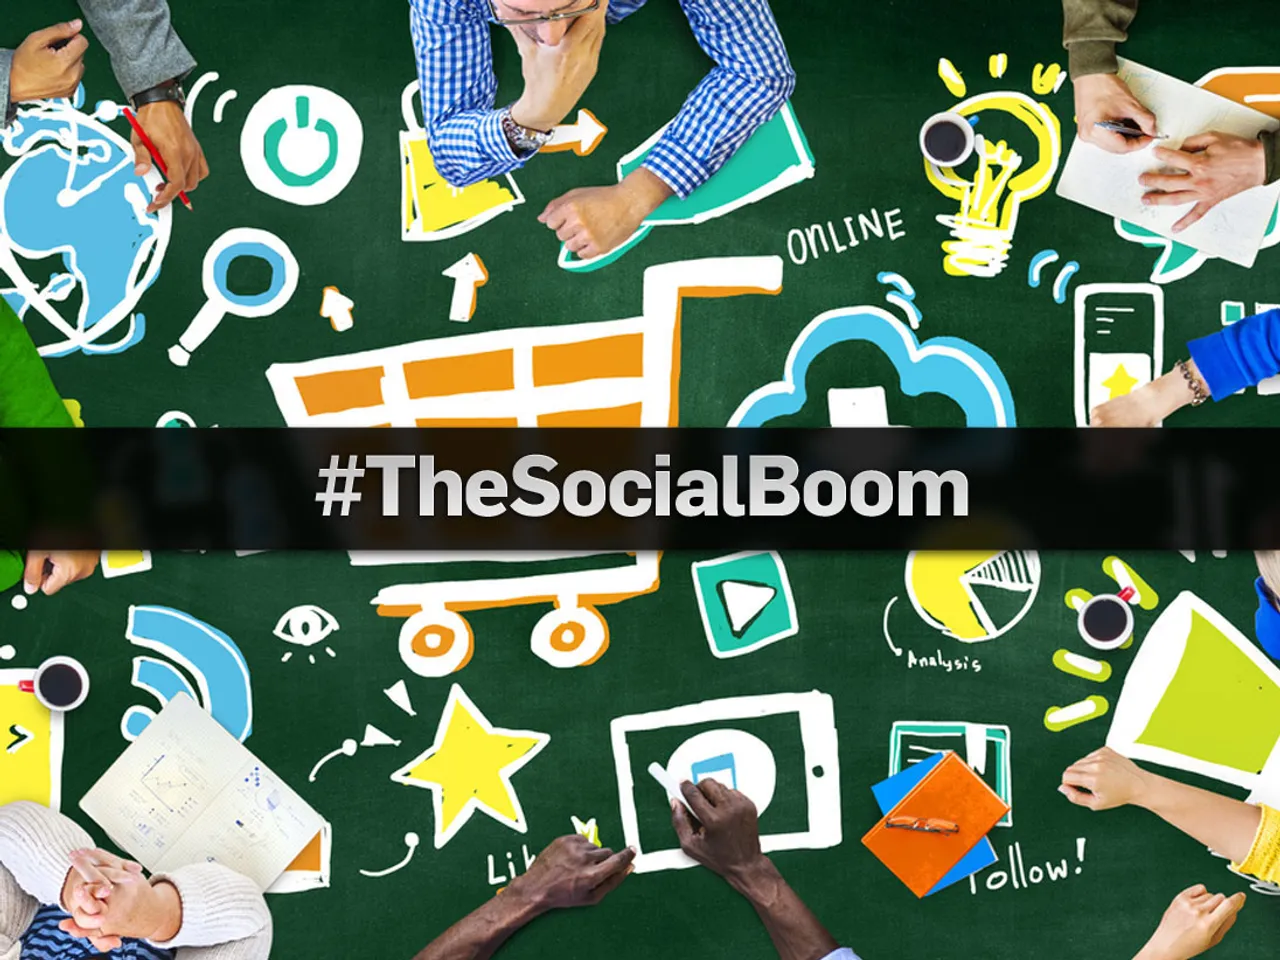 #TheSocialBoom: 7 easy tips to rock your eCommerce brands on social media